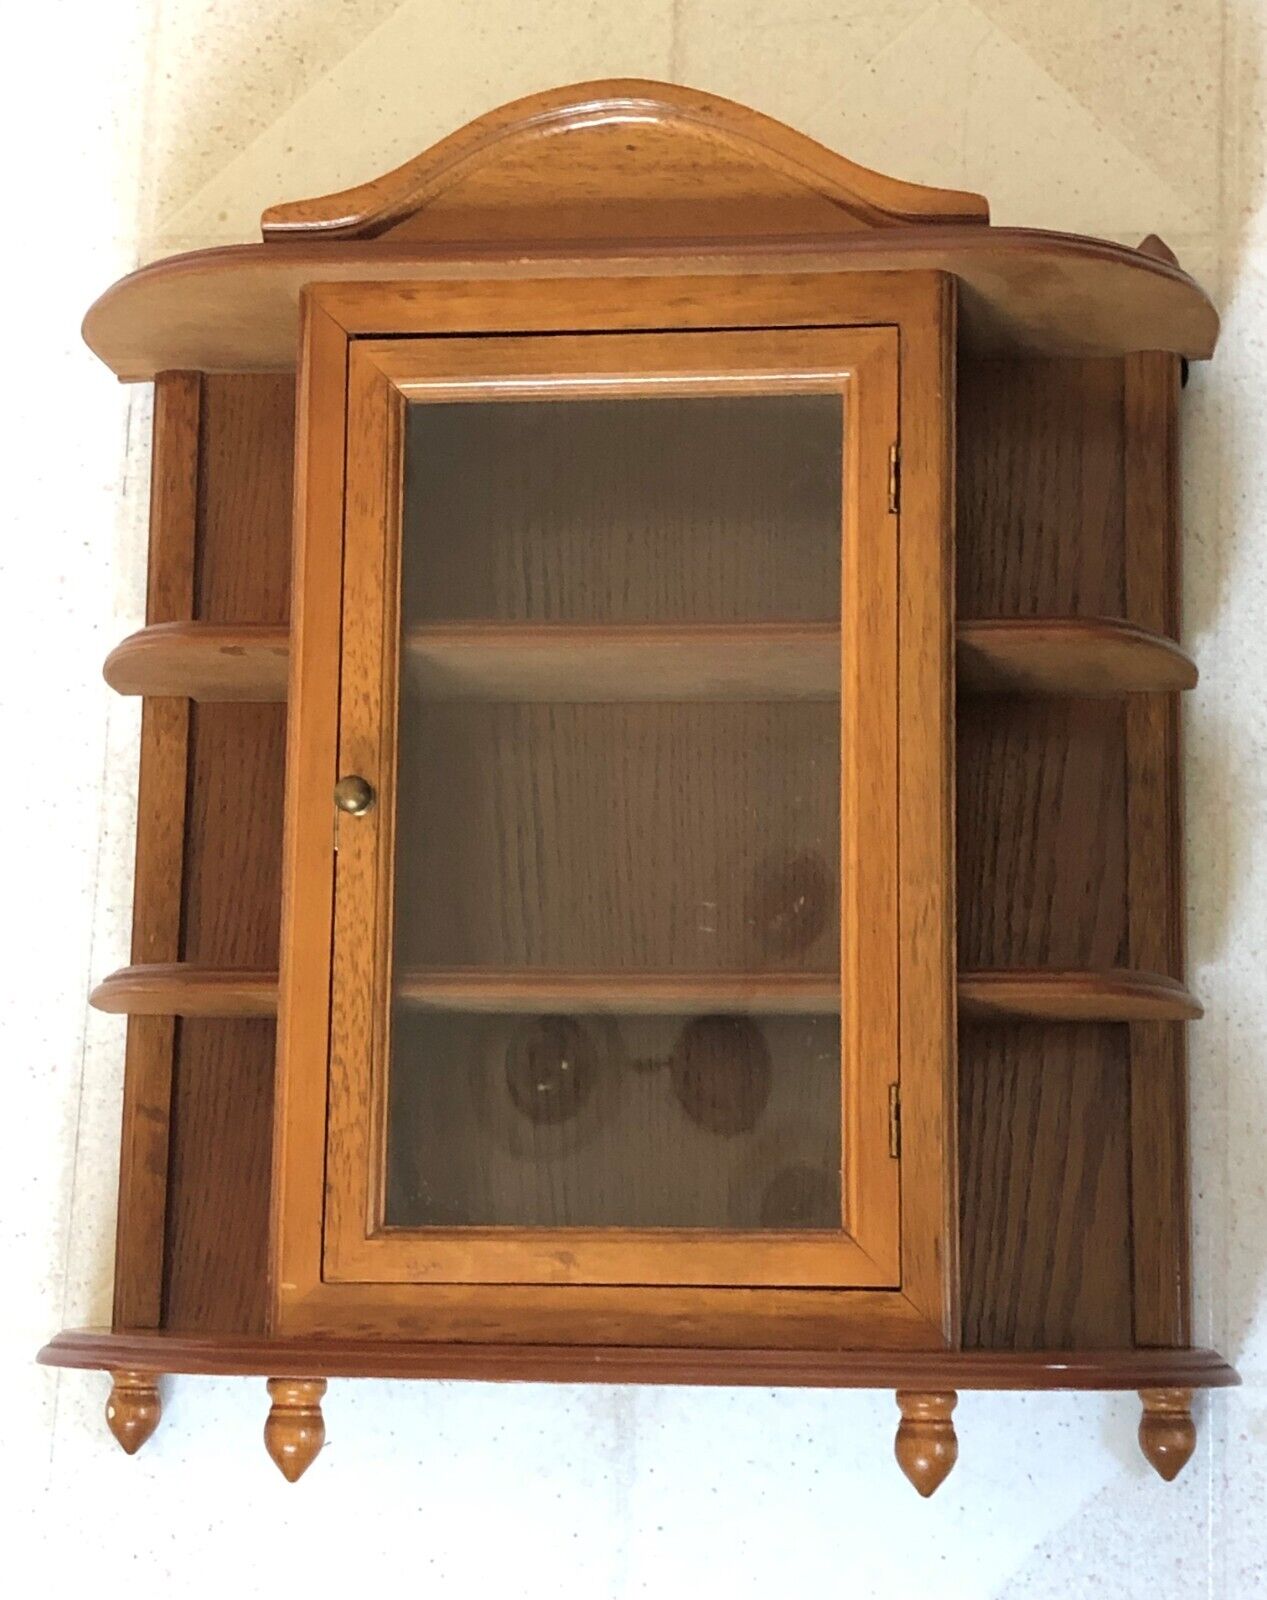 Vintage MID CENTURY Wood Wall Collectors Curio Cabinet with Glass Door & Shelves